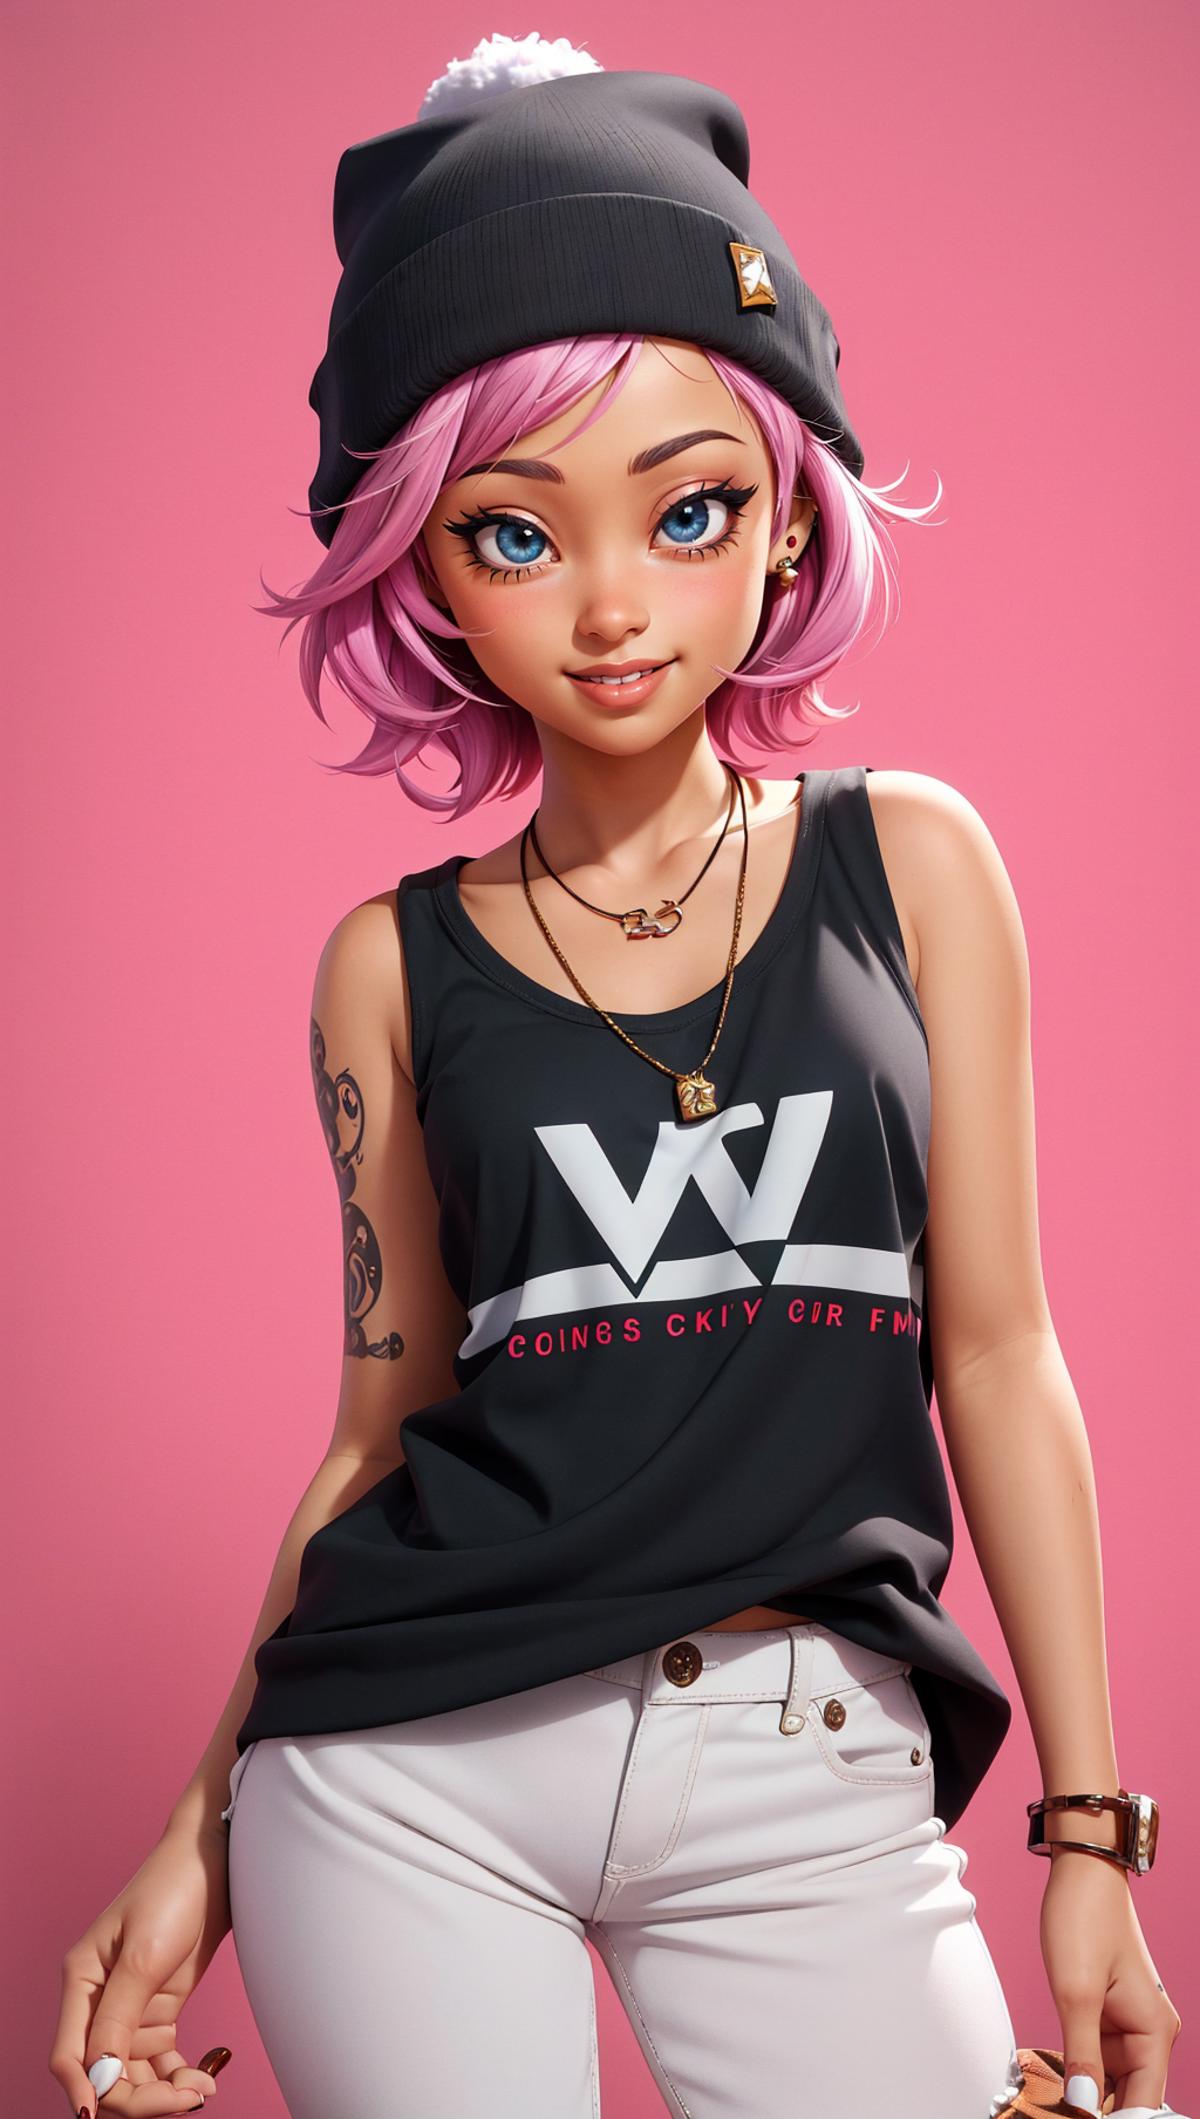 A doll with a pink wig is wearing a black tank top and a necklace.